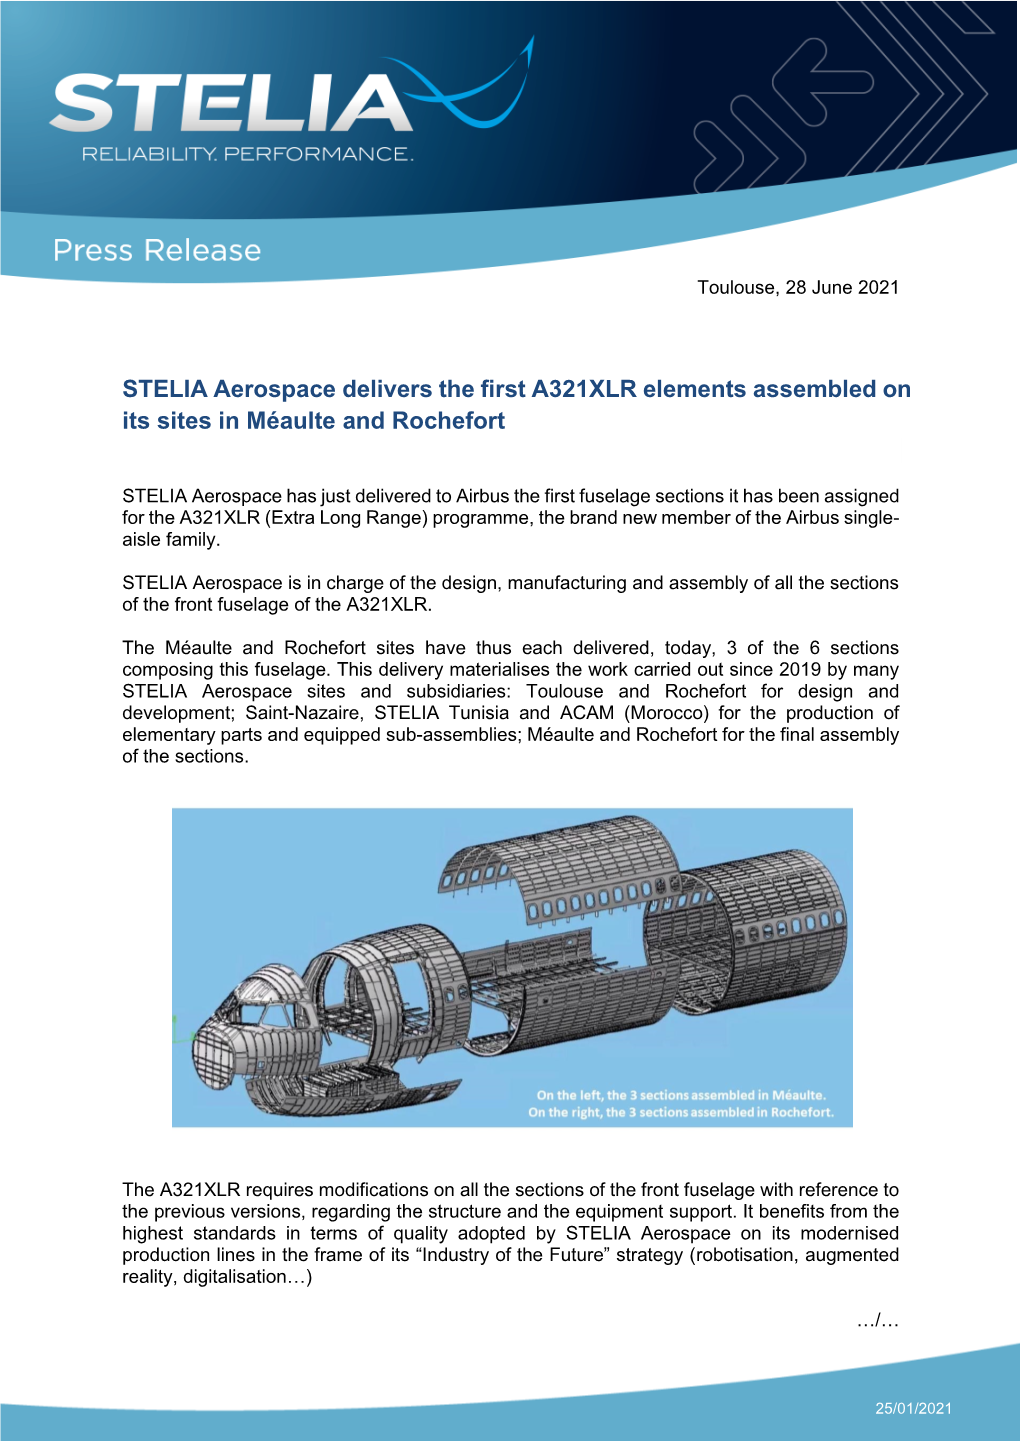 STELIA Aerospace Delivers the First A321XLR Elements Assembled on Its Sites in Méaulte and Rochefort